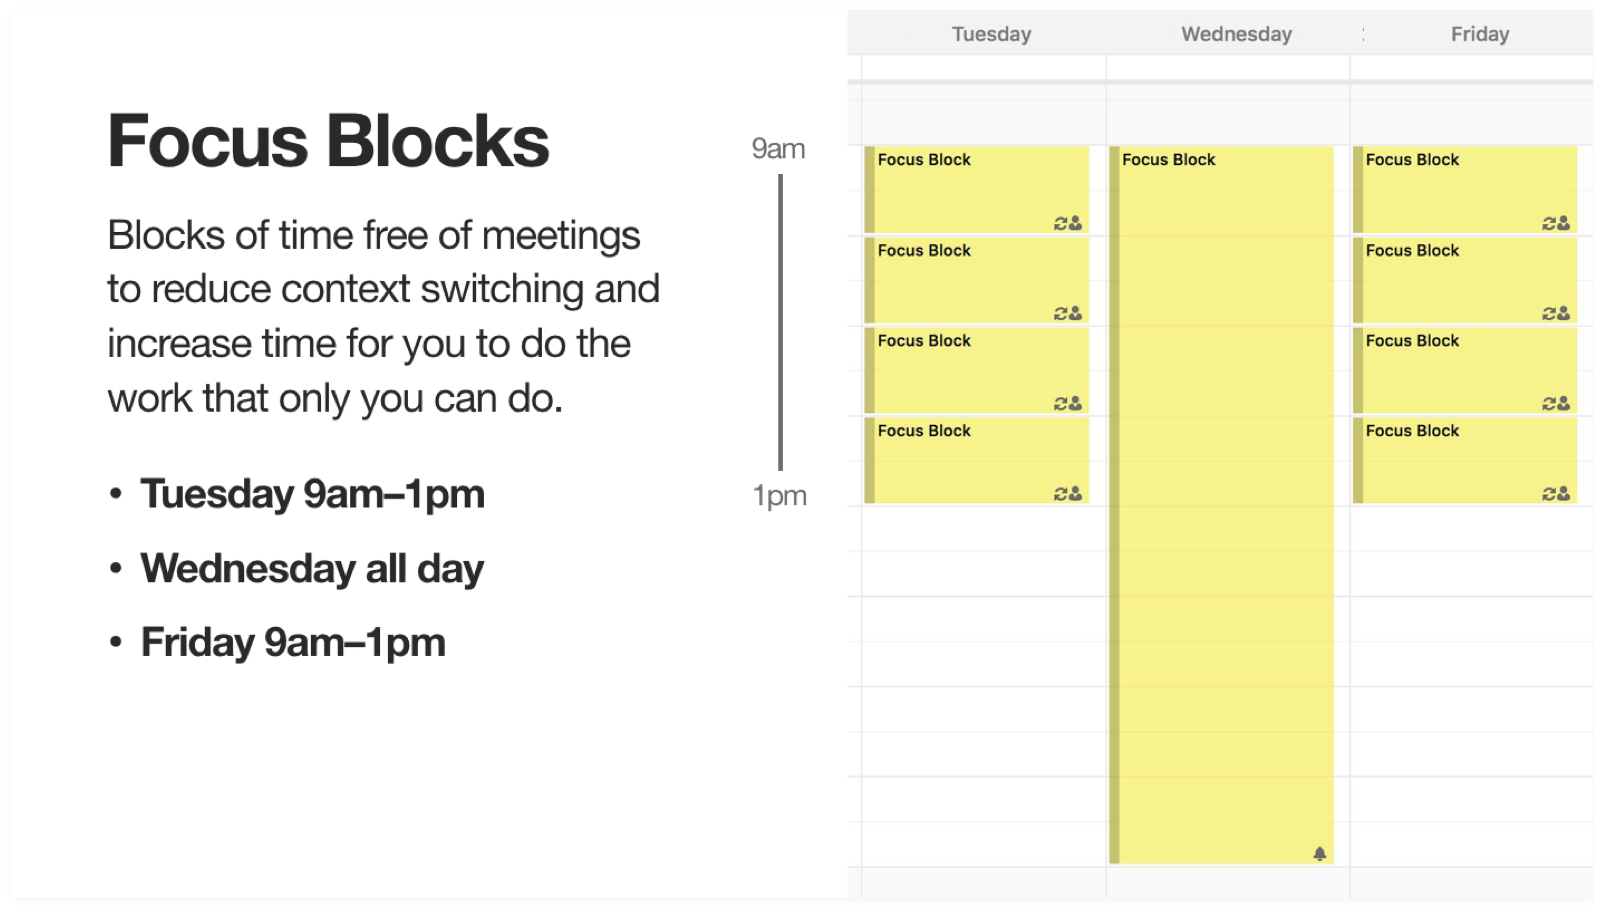 Screenshot showing calendar focus blocks on Tuesdays and Fridays 9am-1pm and Wednesdays all day